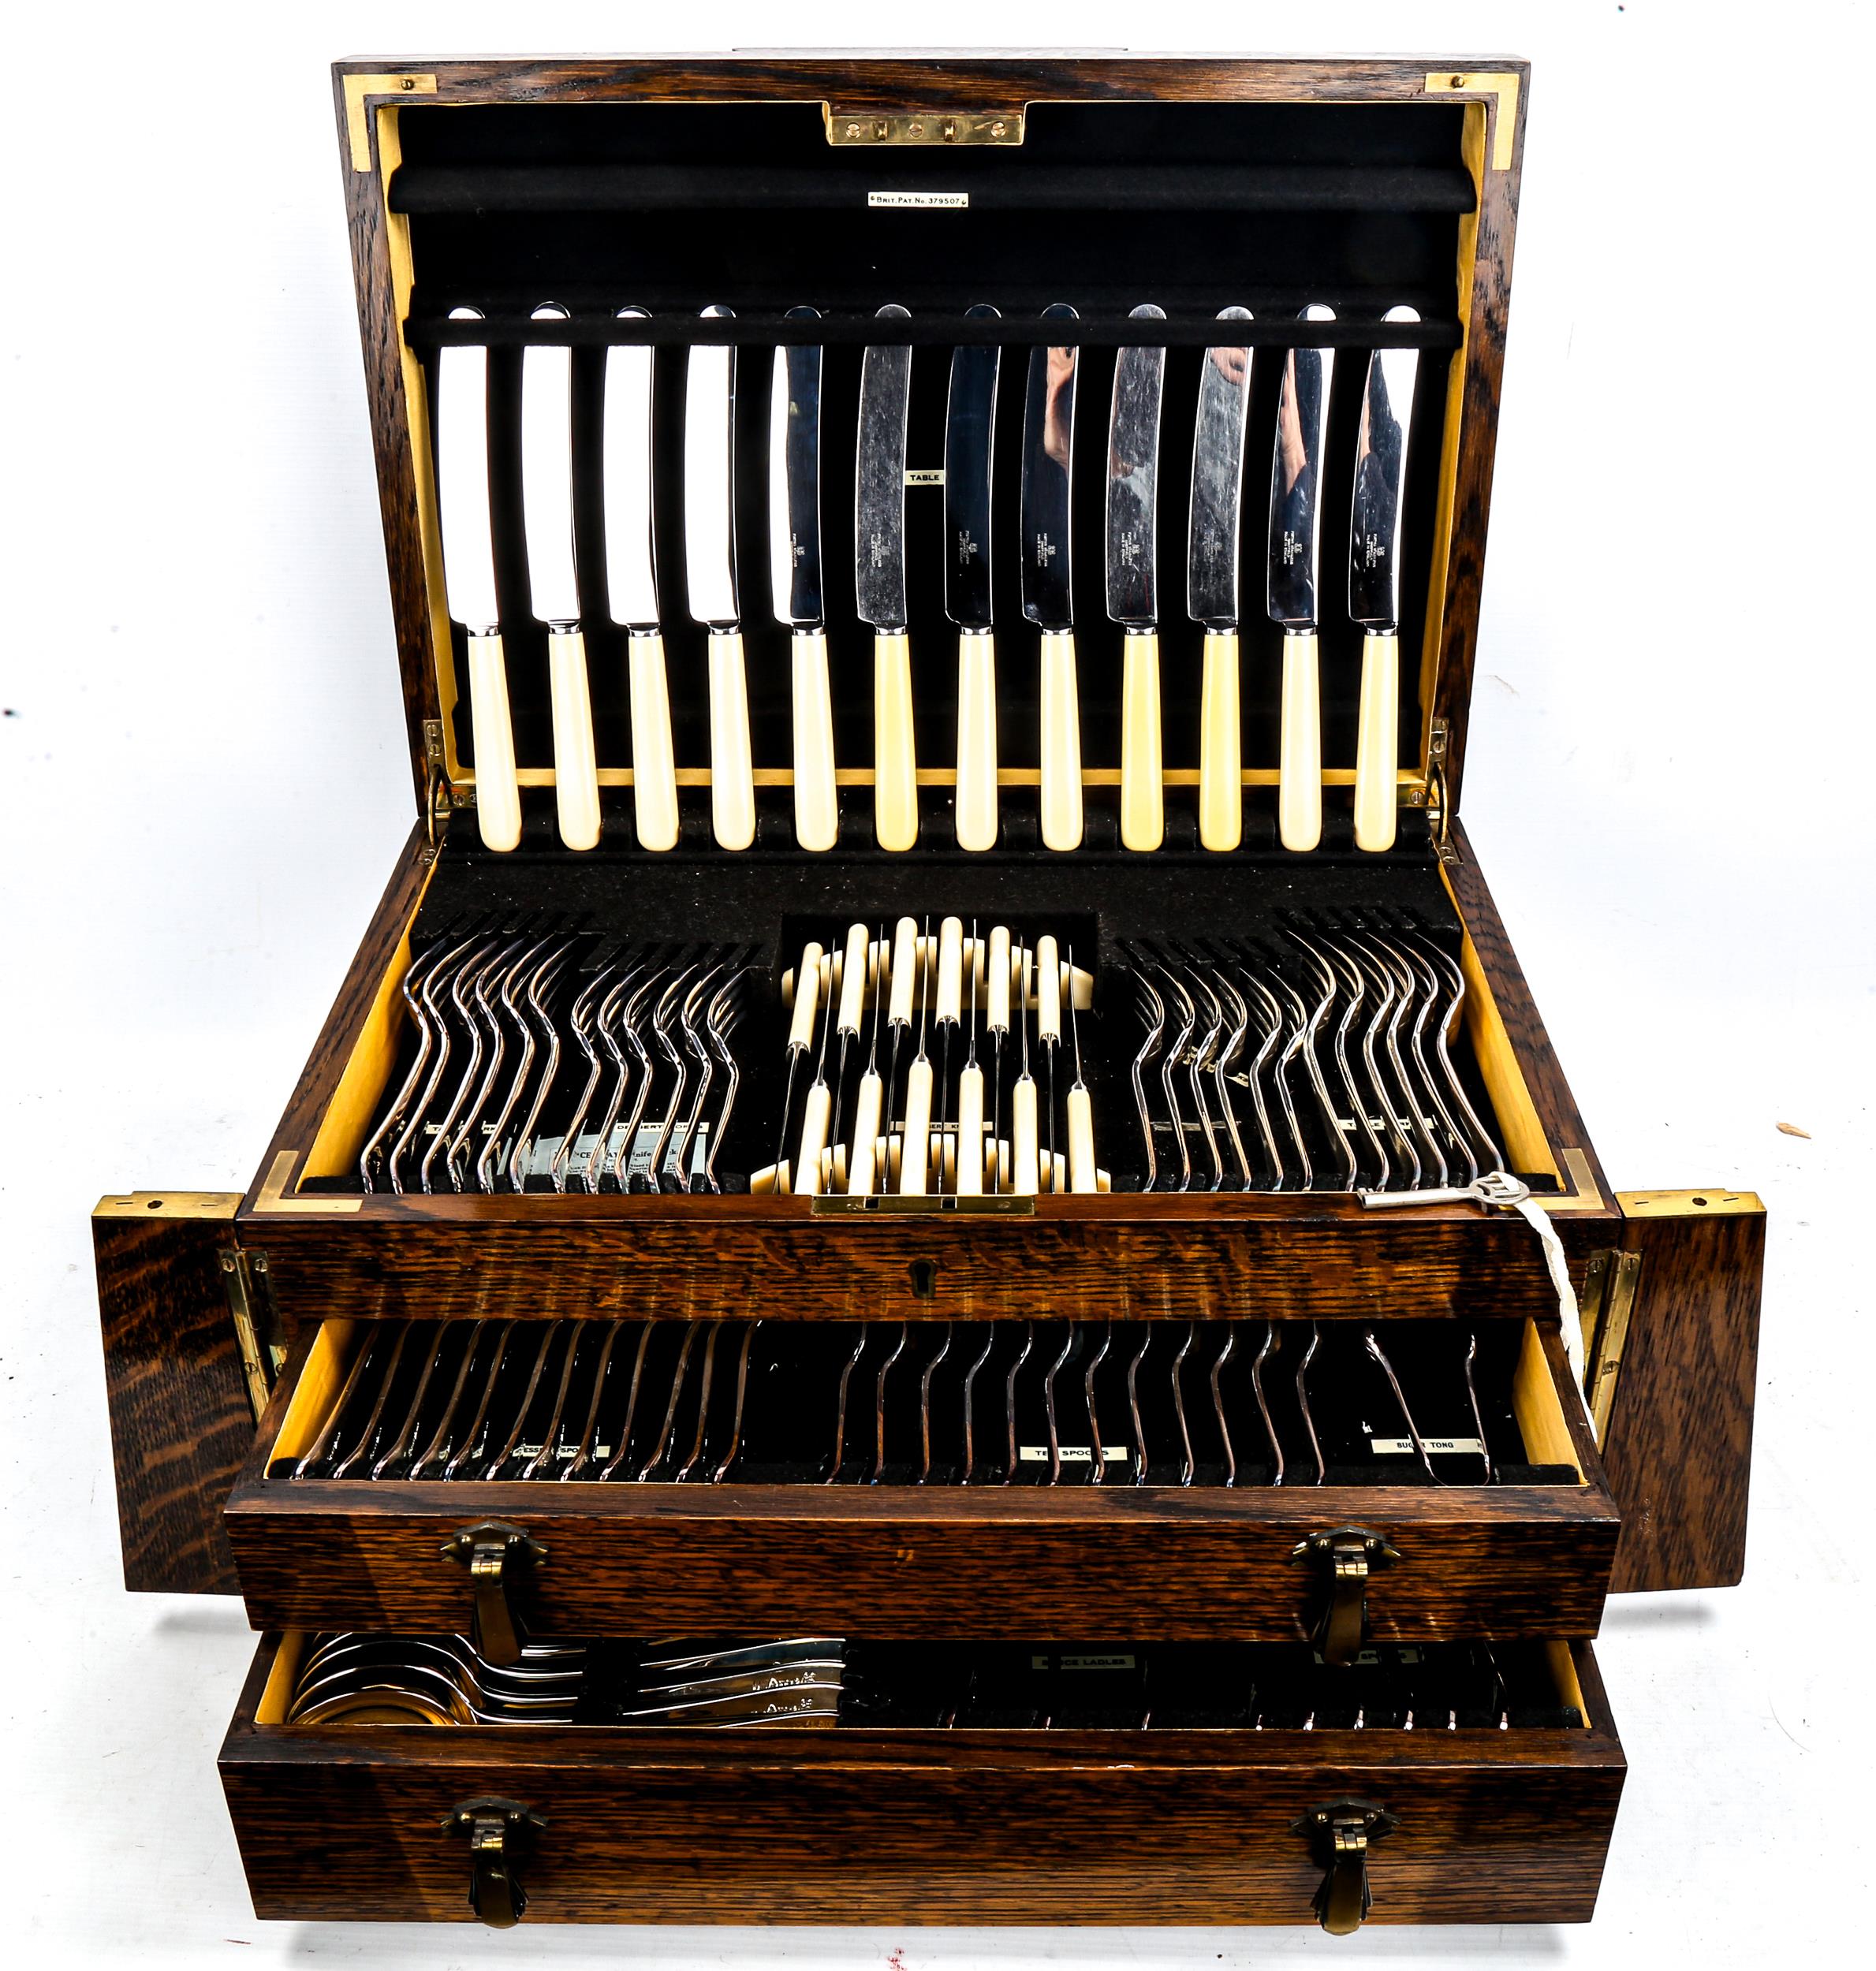 A canteen of Unity Old English pattern cutlery and servers for 12 people, in an oak cabinet with 2